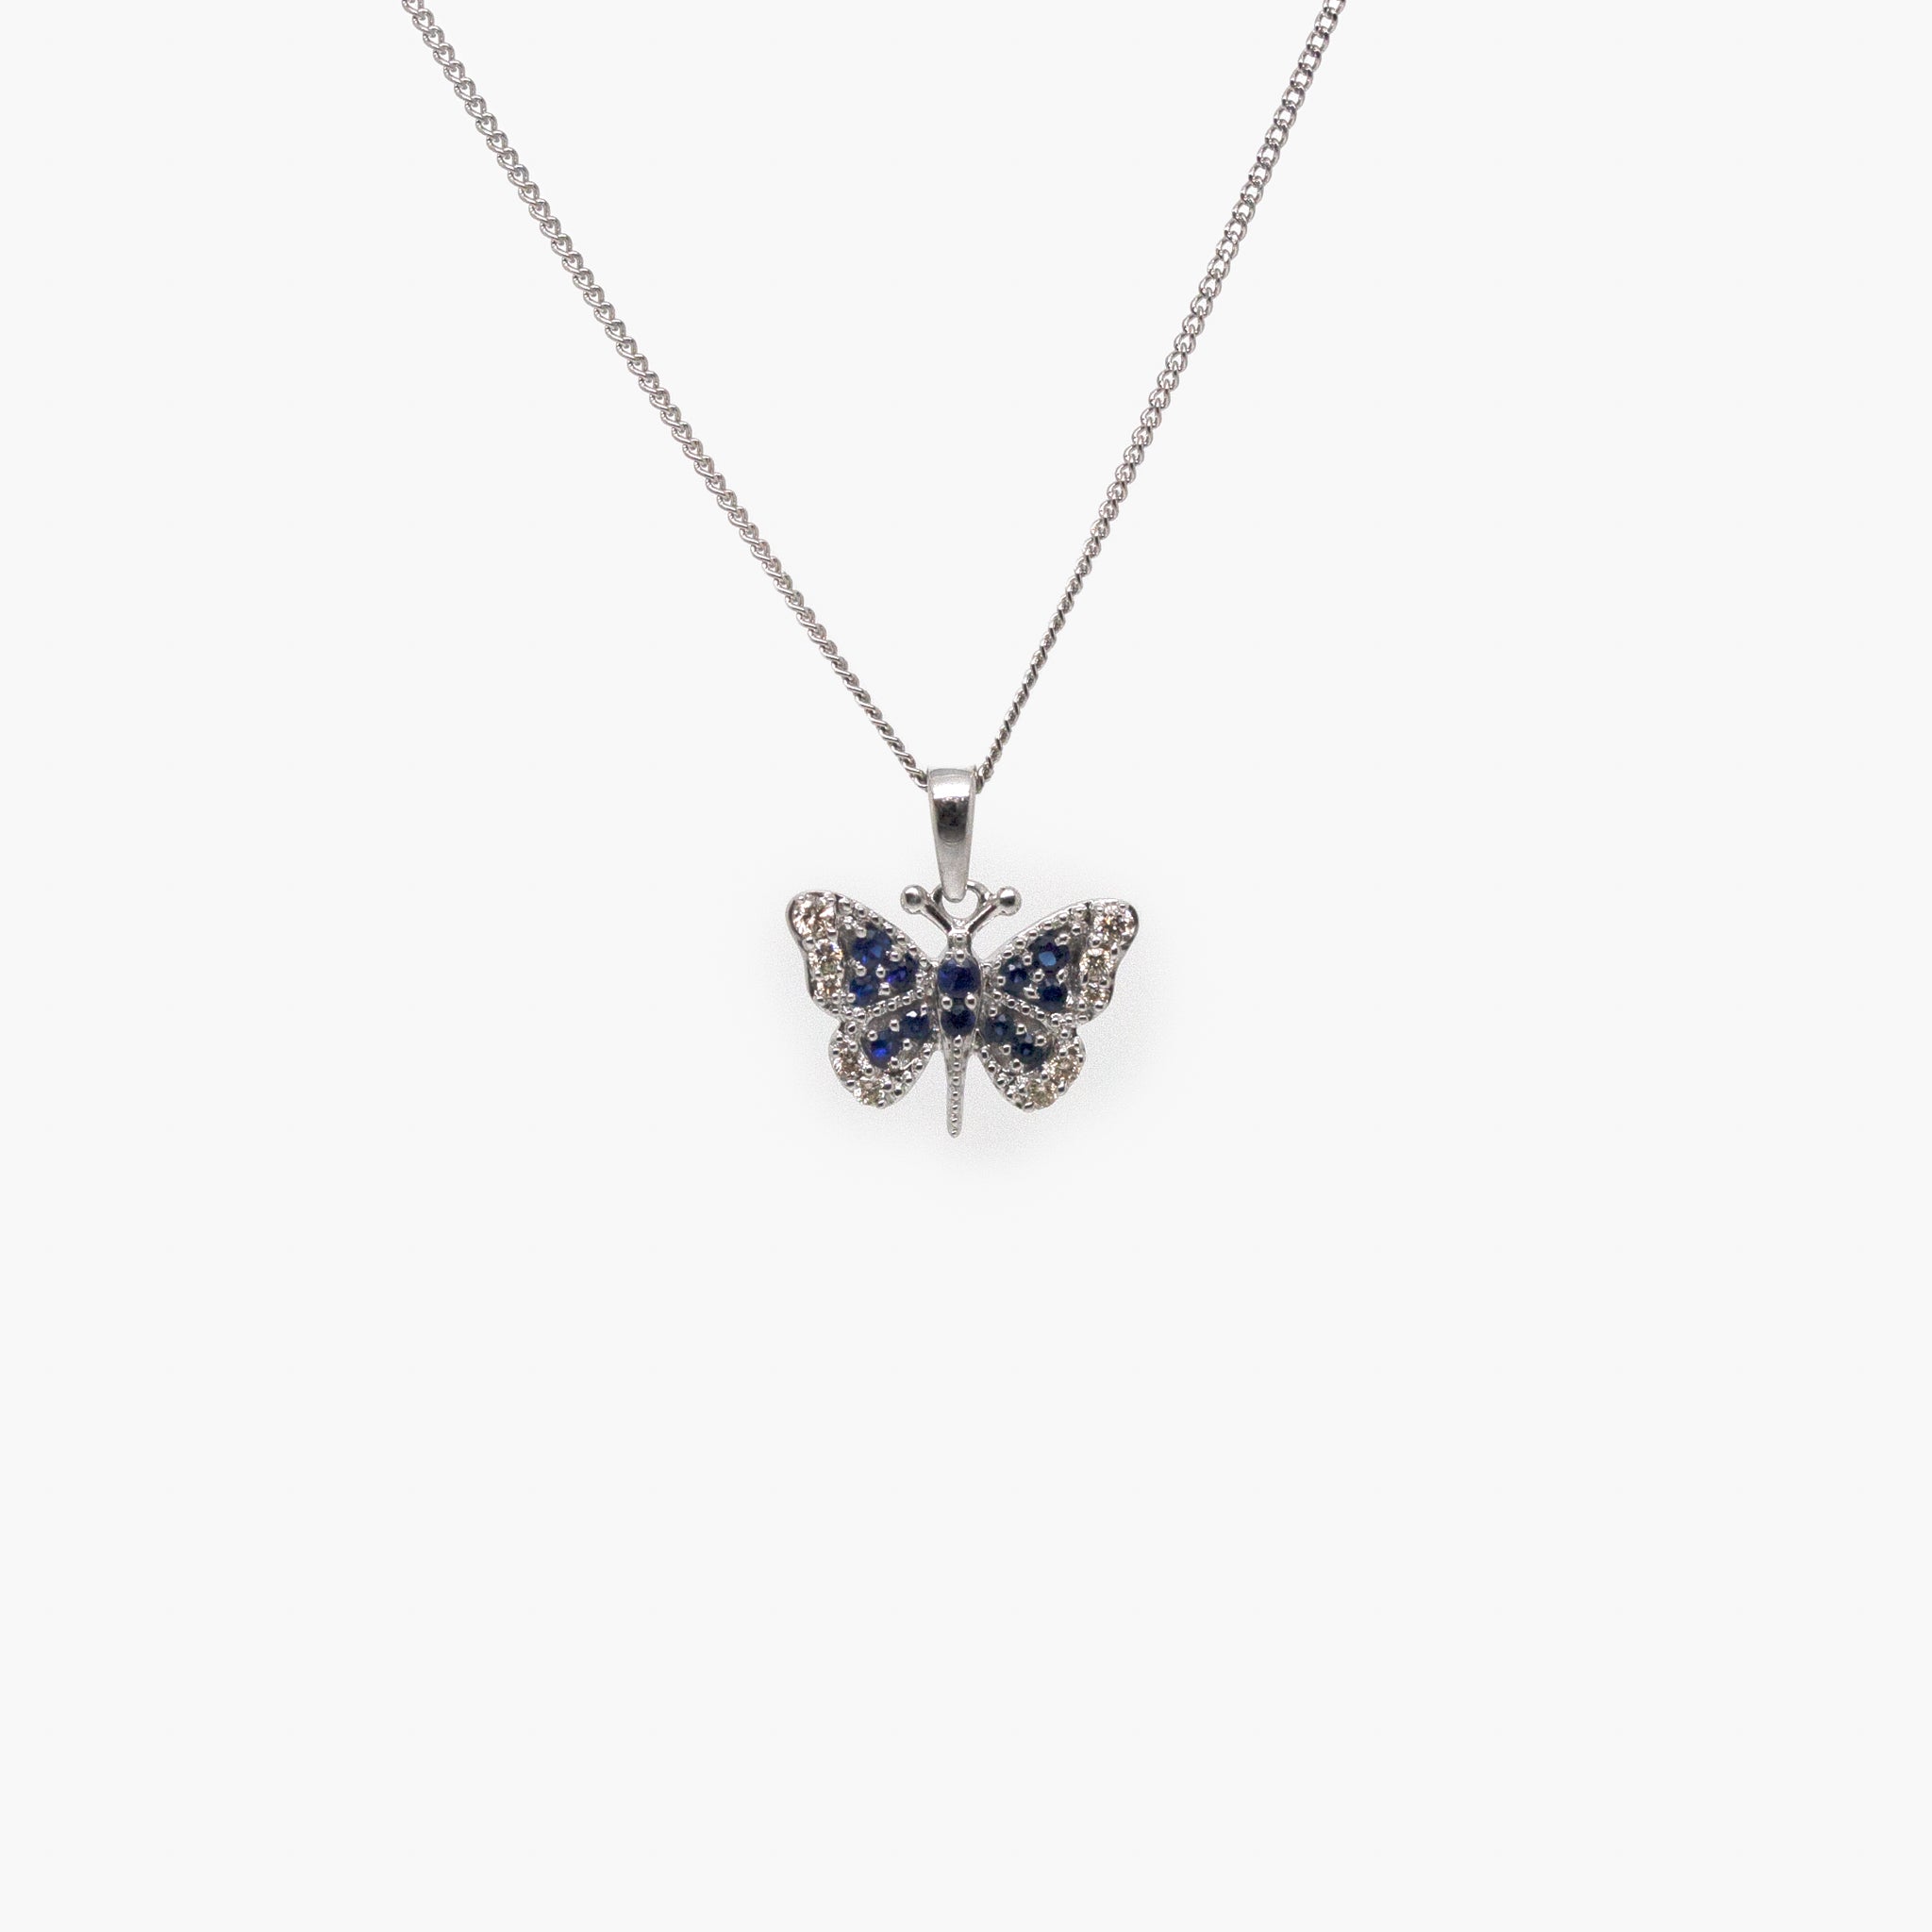 Blue Topaz Butterfly Necklace, 0.18ct Blue Topaz Pendant, Sterling Silver  925, Natural Stones , December Birthstone - Etsy